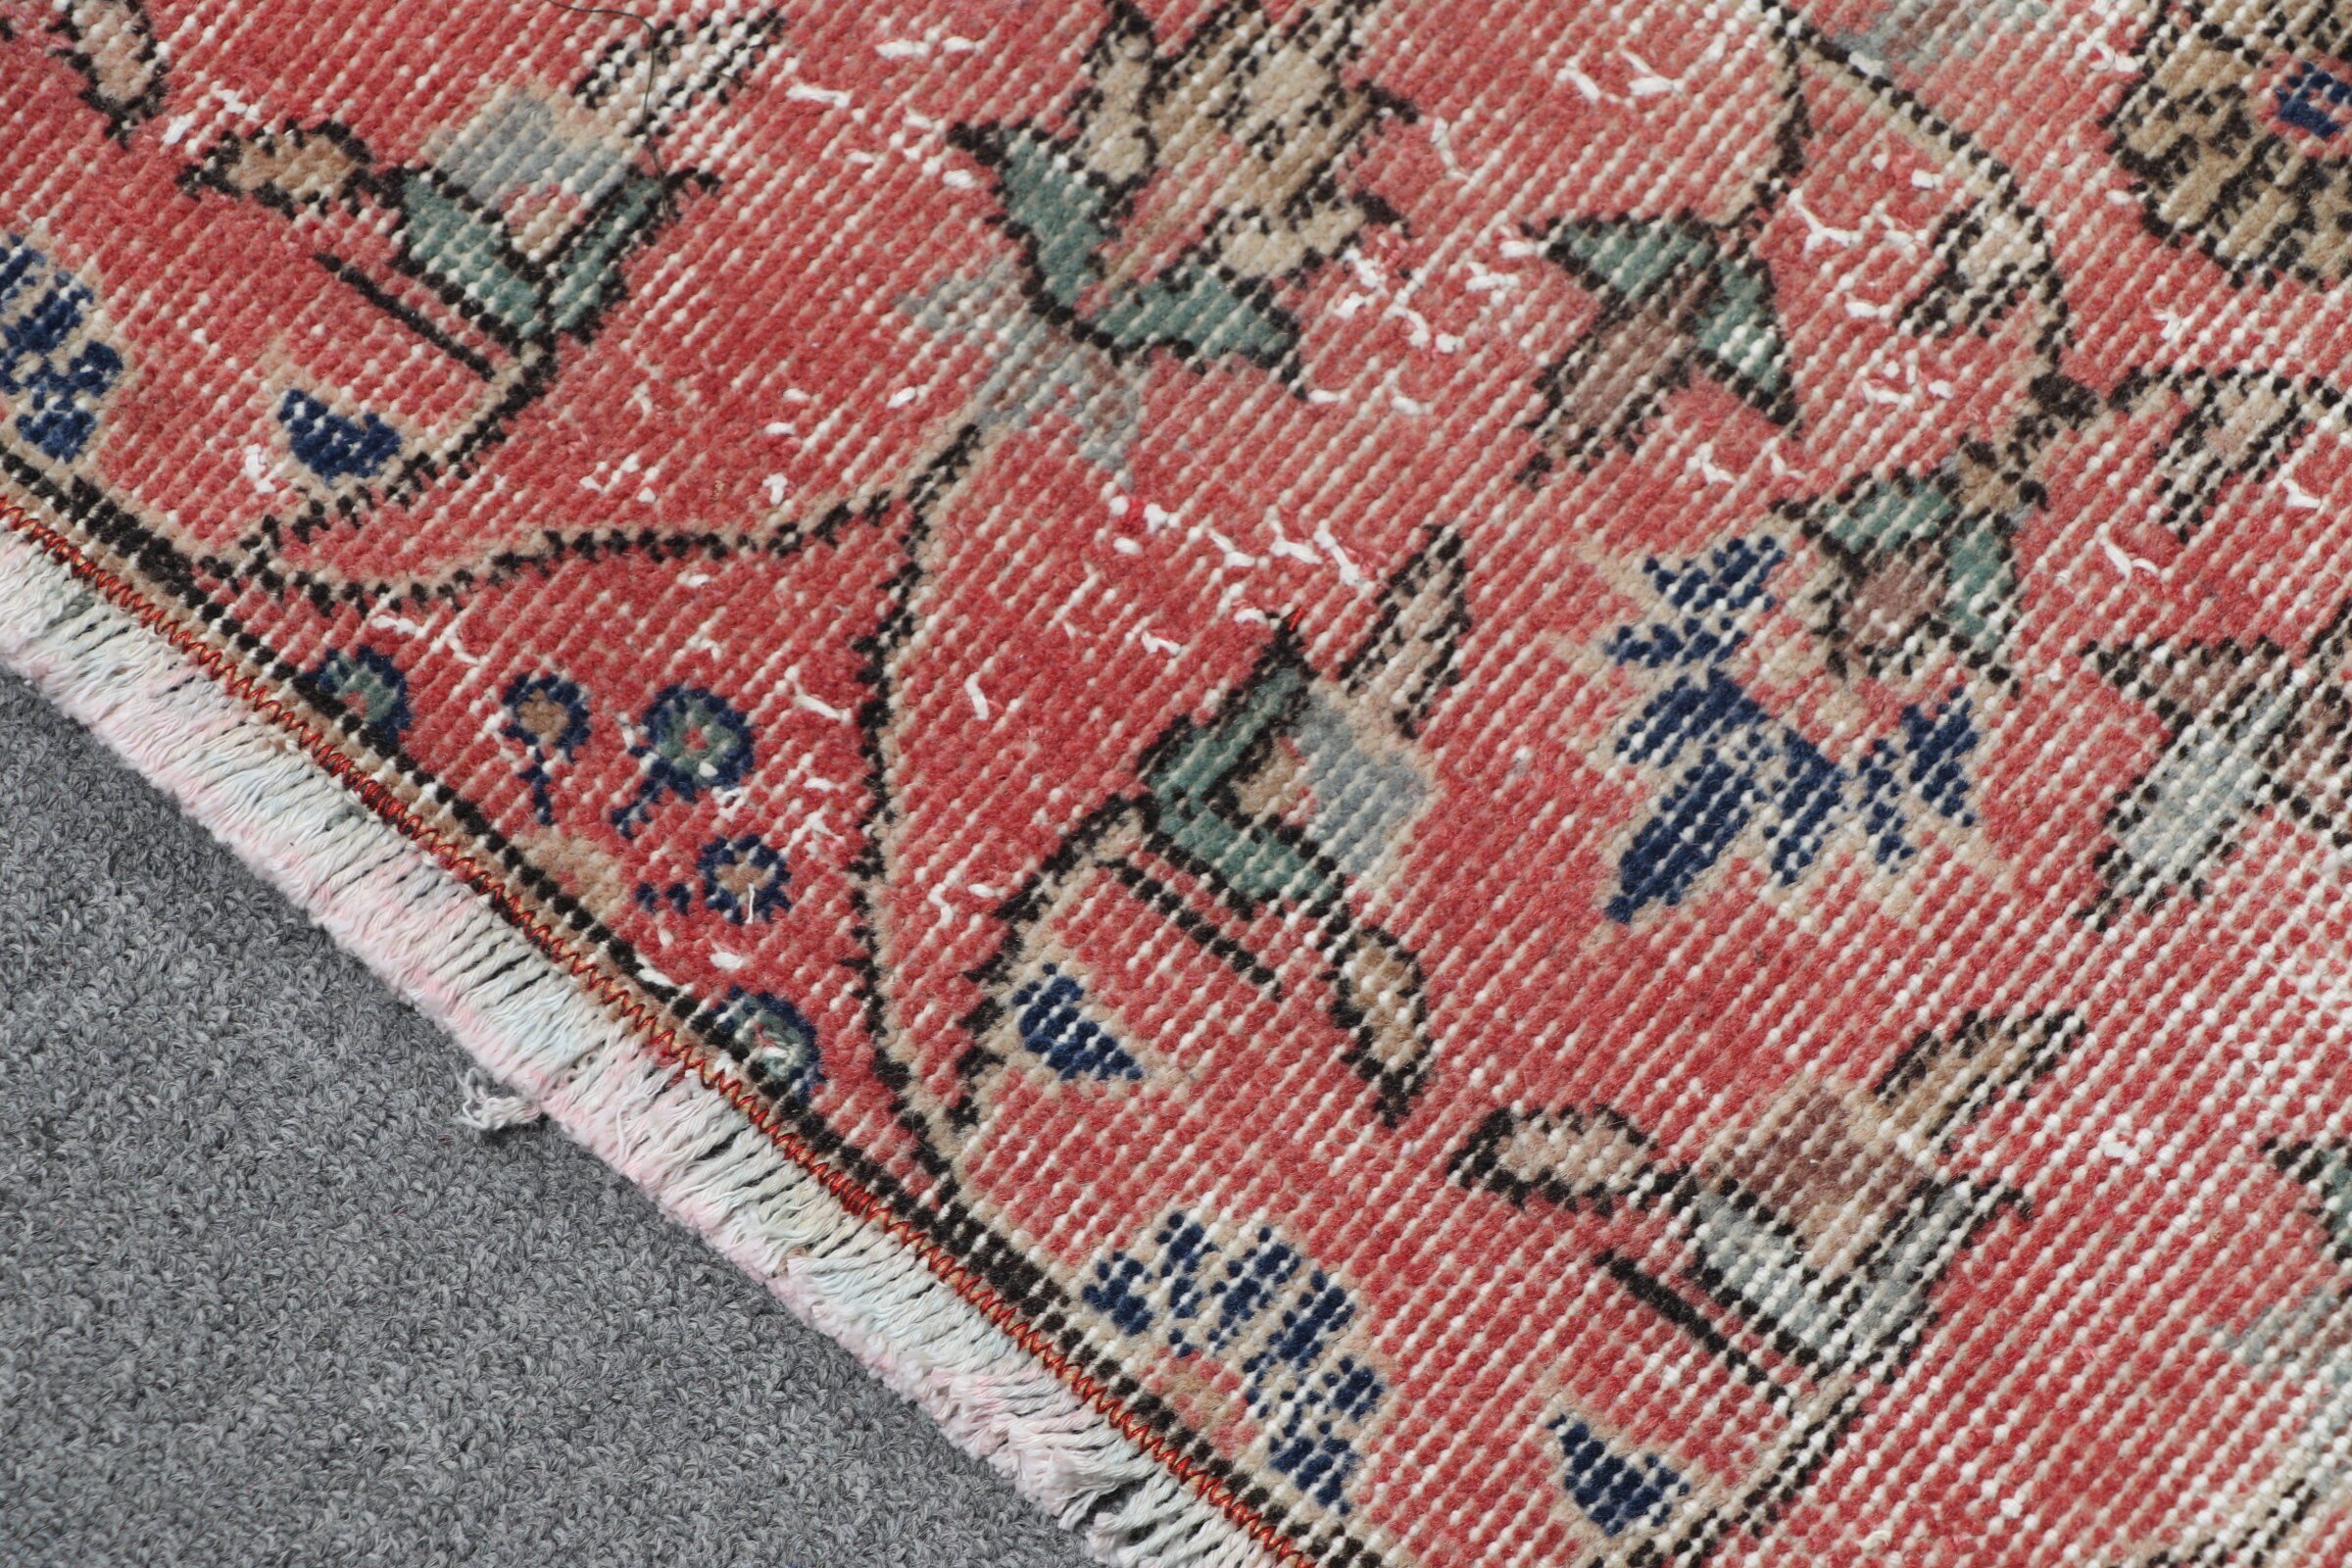 Floor Rug, Turkish Rug, Red Antique Rug, Anatolian Rugs, Eclectic Rugs, Rugs for Stair, 2.3x5.9 ft Runner Rug, Vintage Rugs, Kitchen Rug